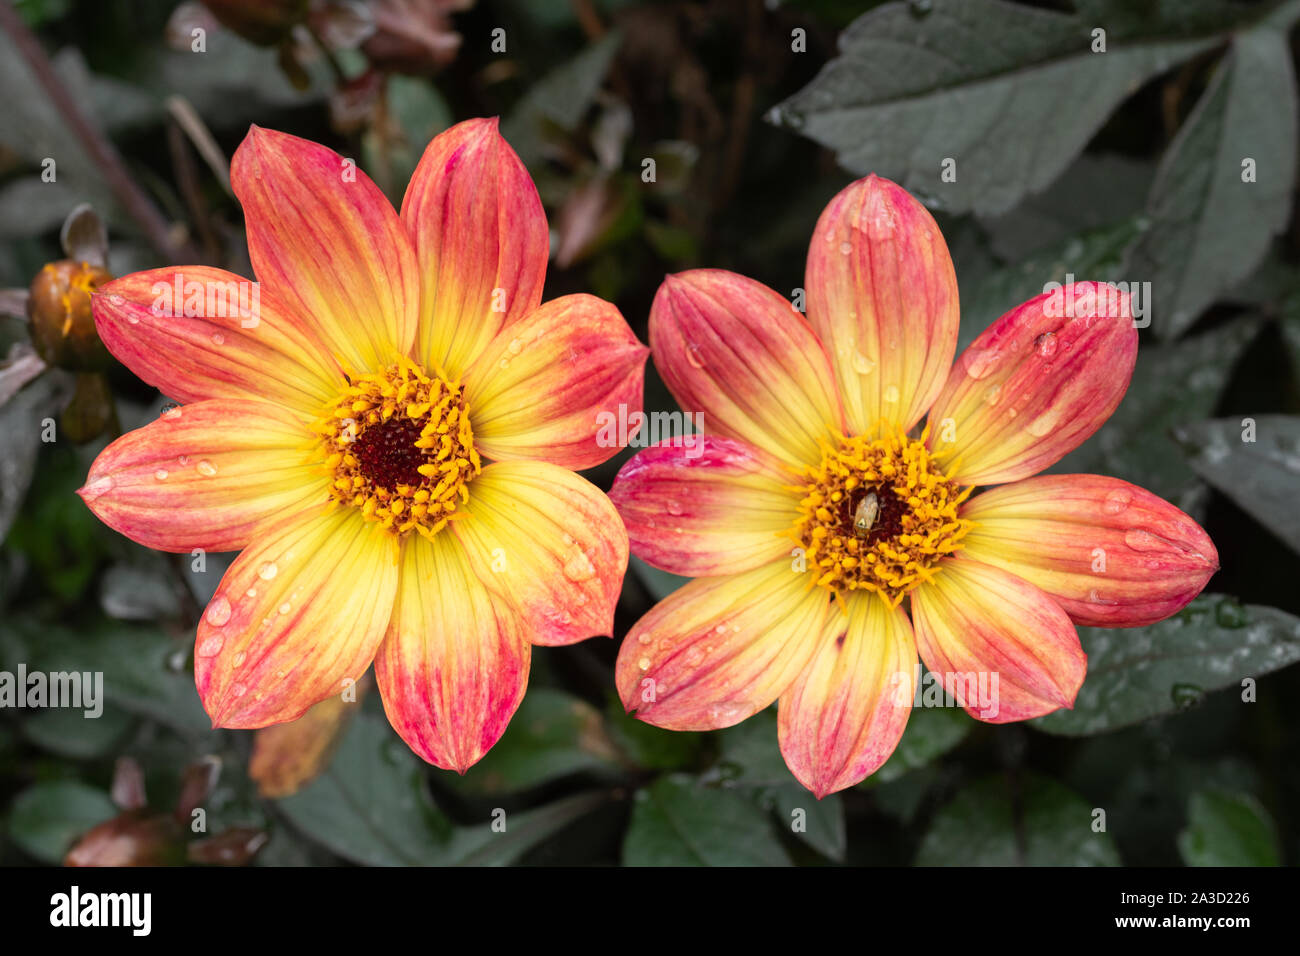 Dahlia flowers (Dahlia Happy Single Flame or HS Flame) at RHS Wisley Gardens in Surrey, UK, during October Stock Photo